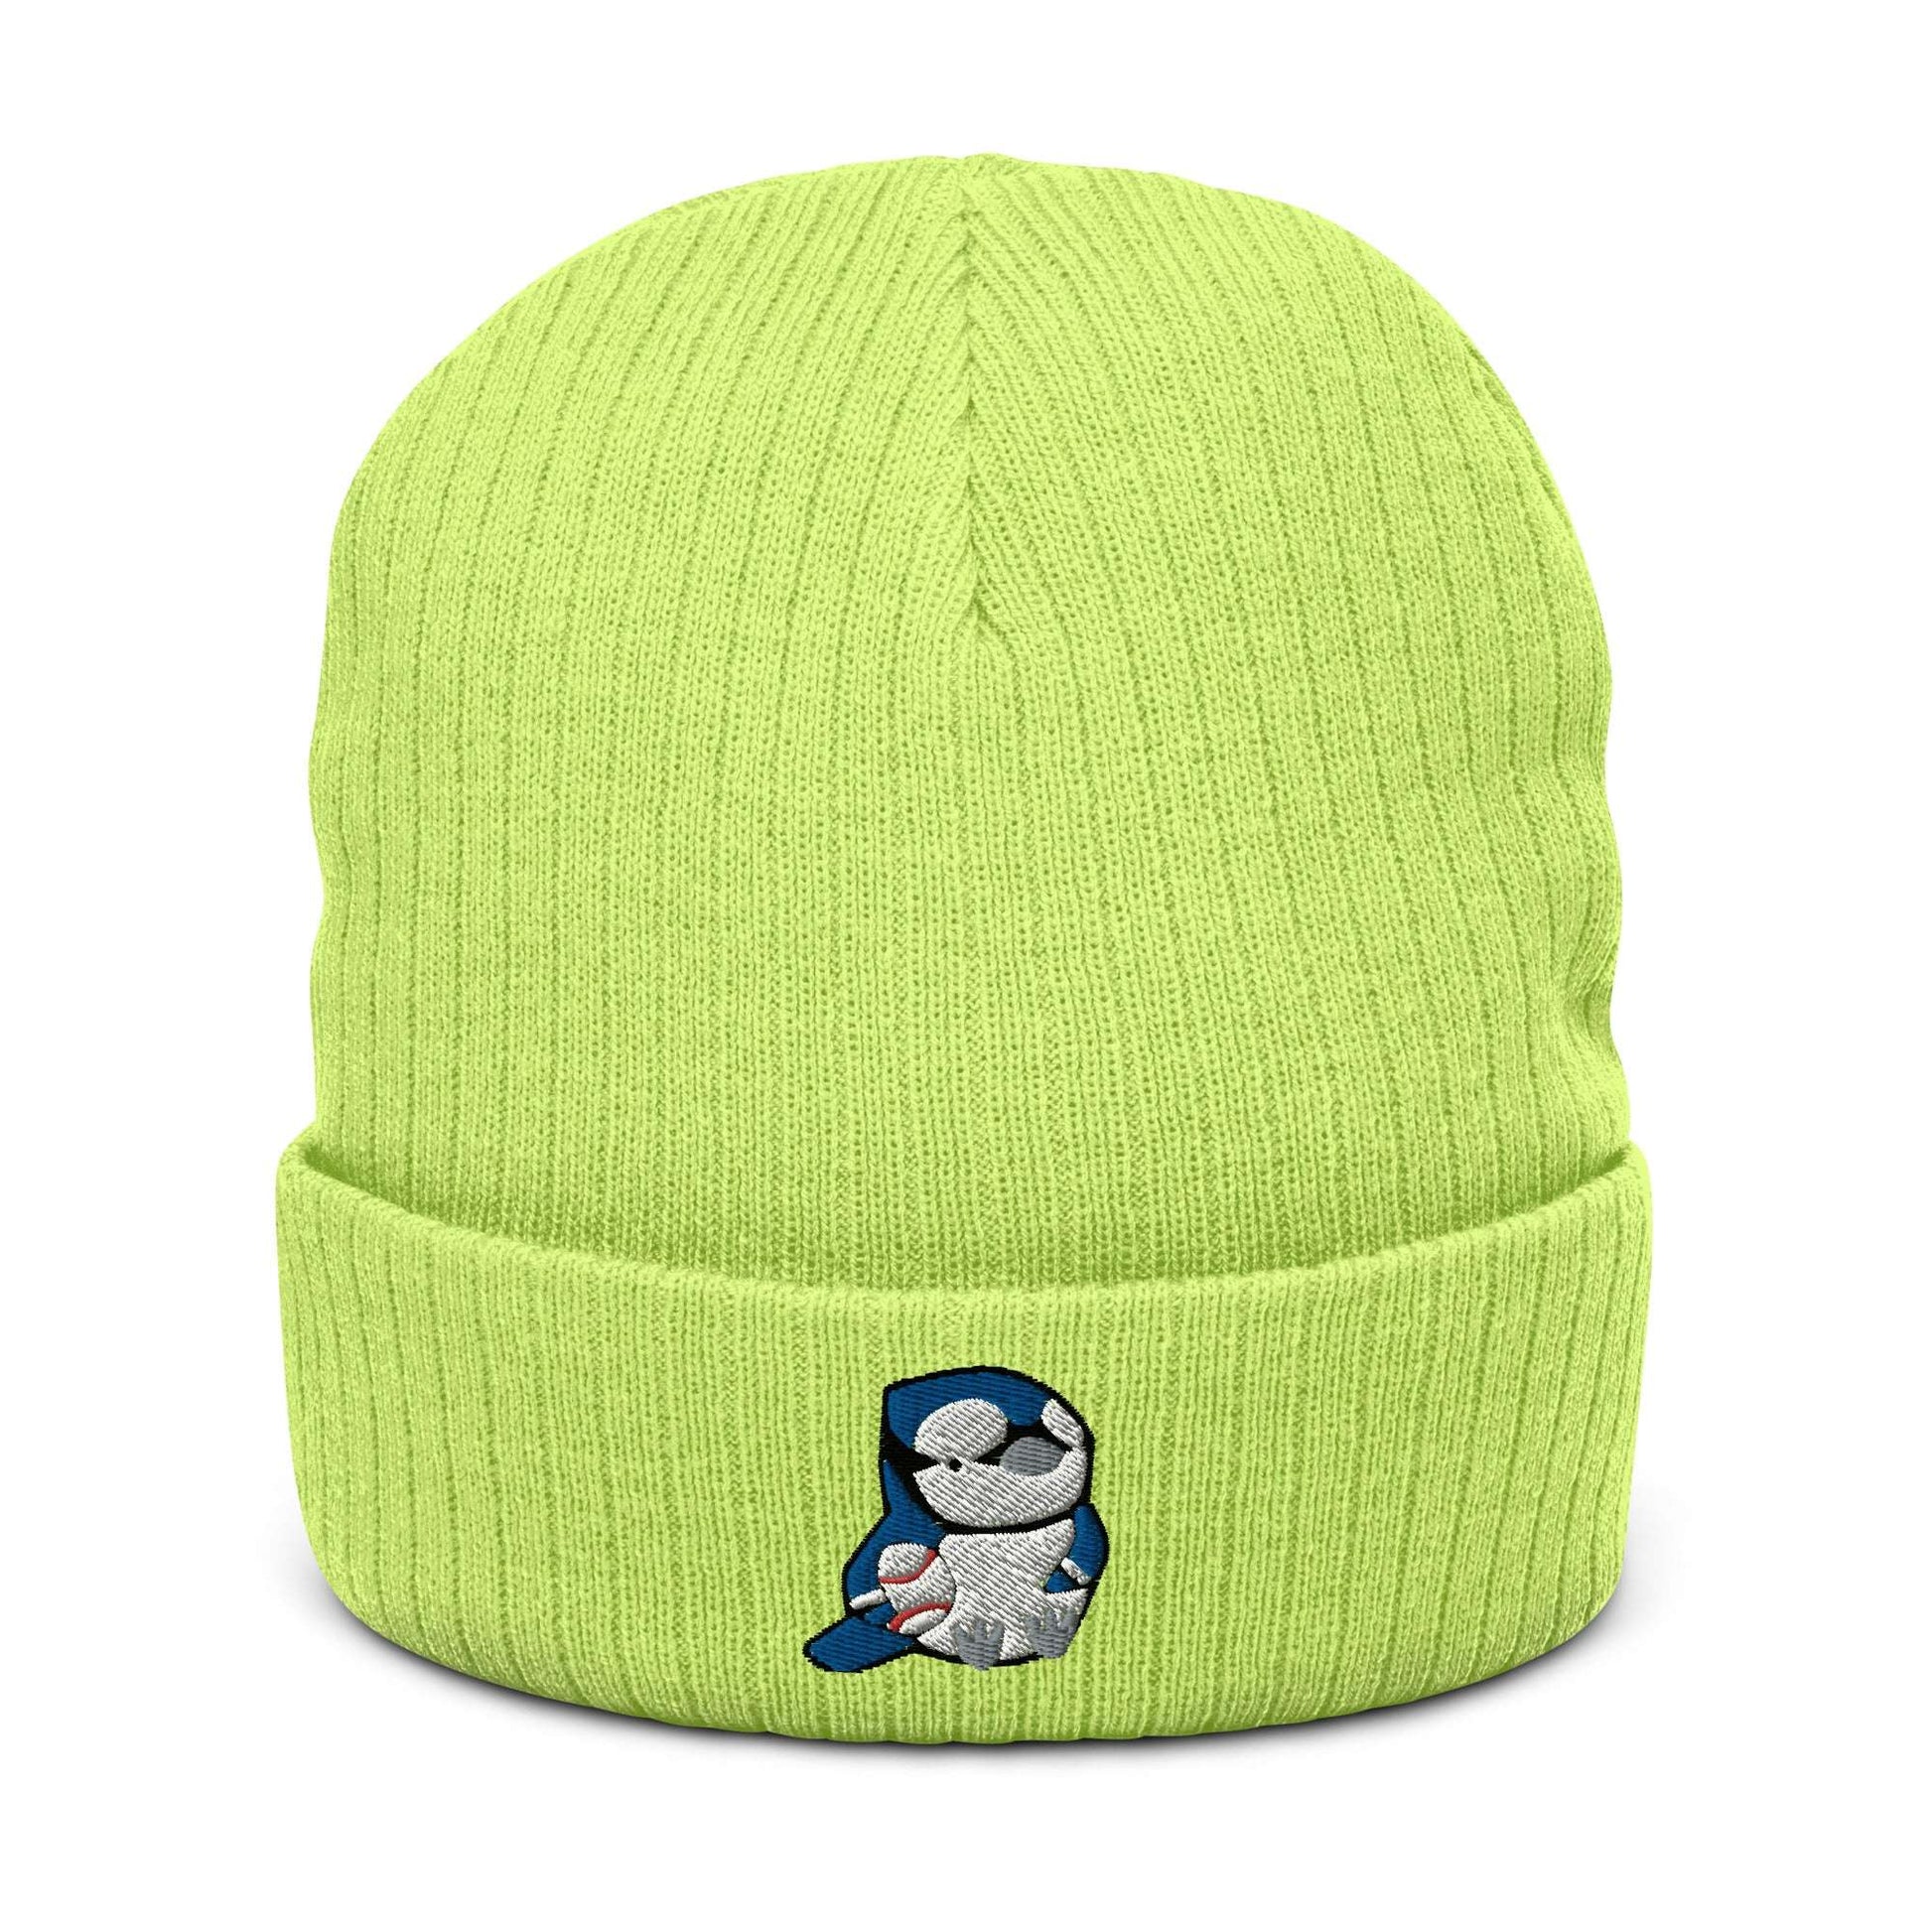 Embroidered ribbed Beanie with Blue Jay Bird Holding a Baseball: Acid Green